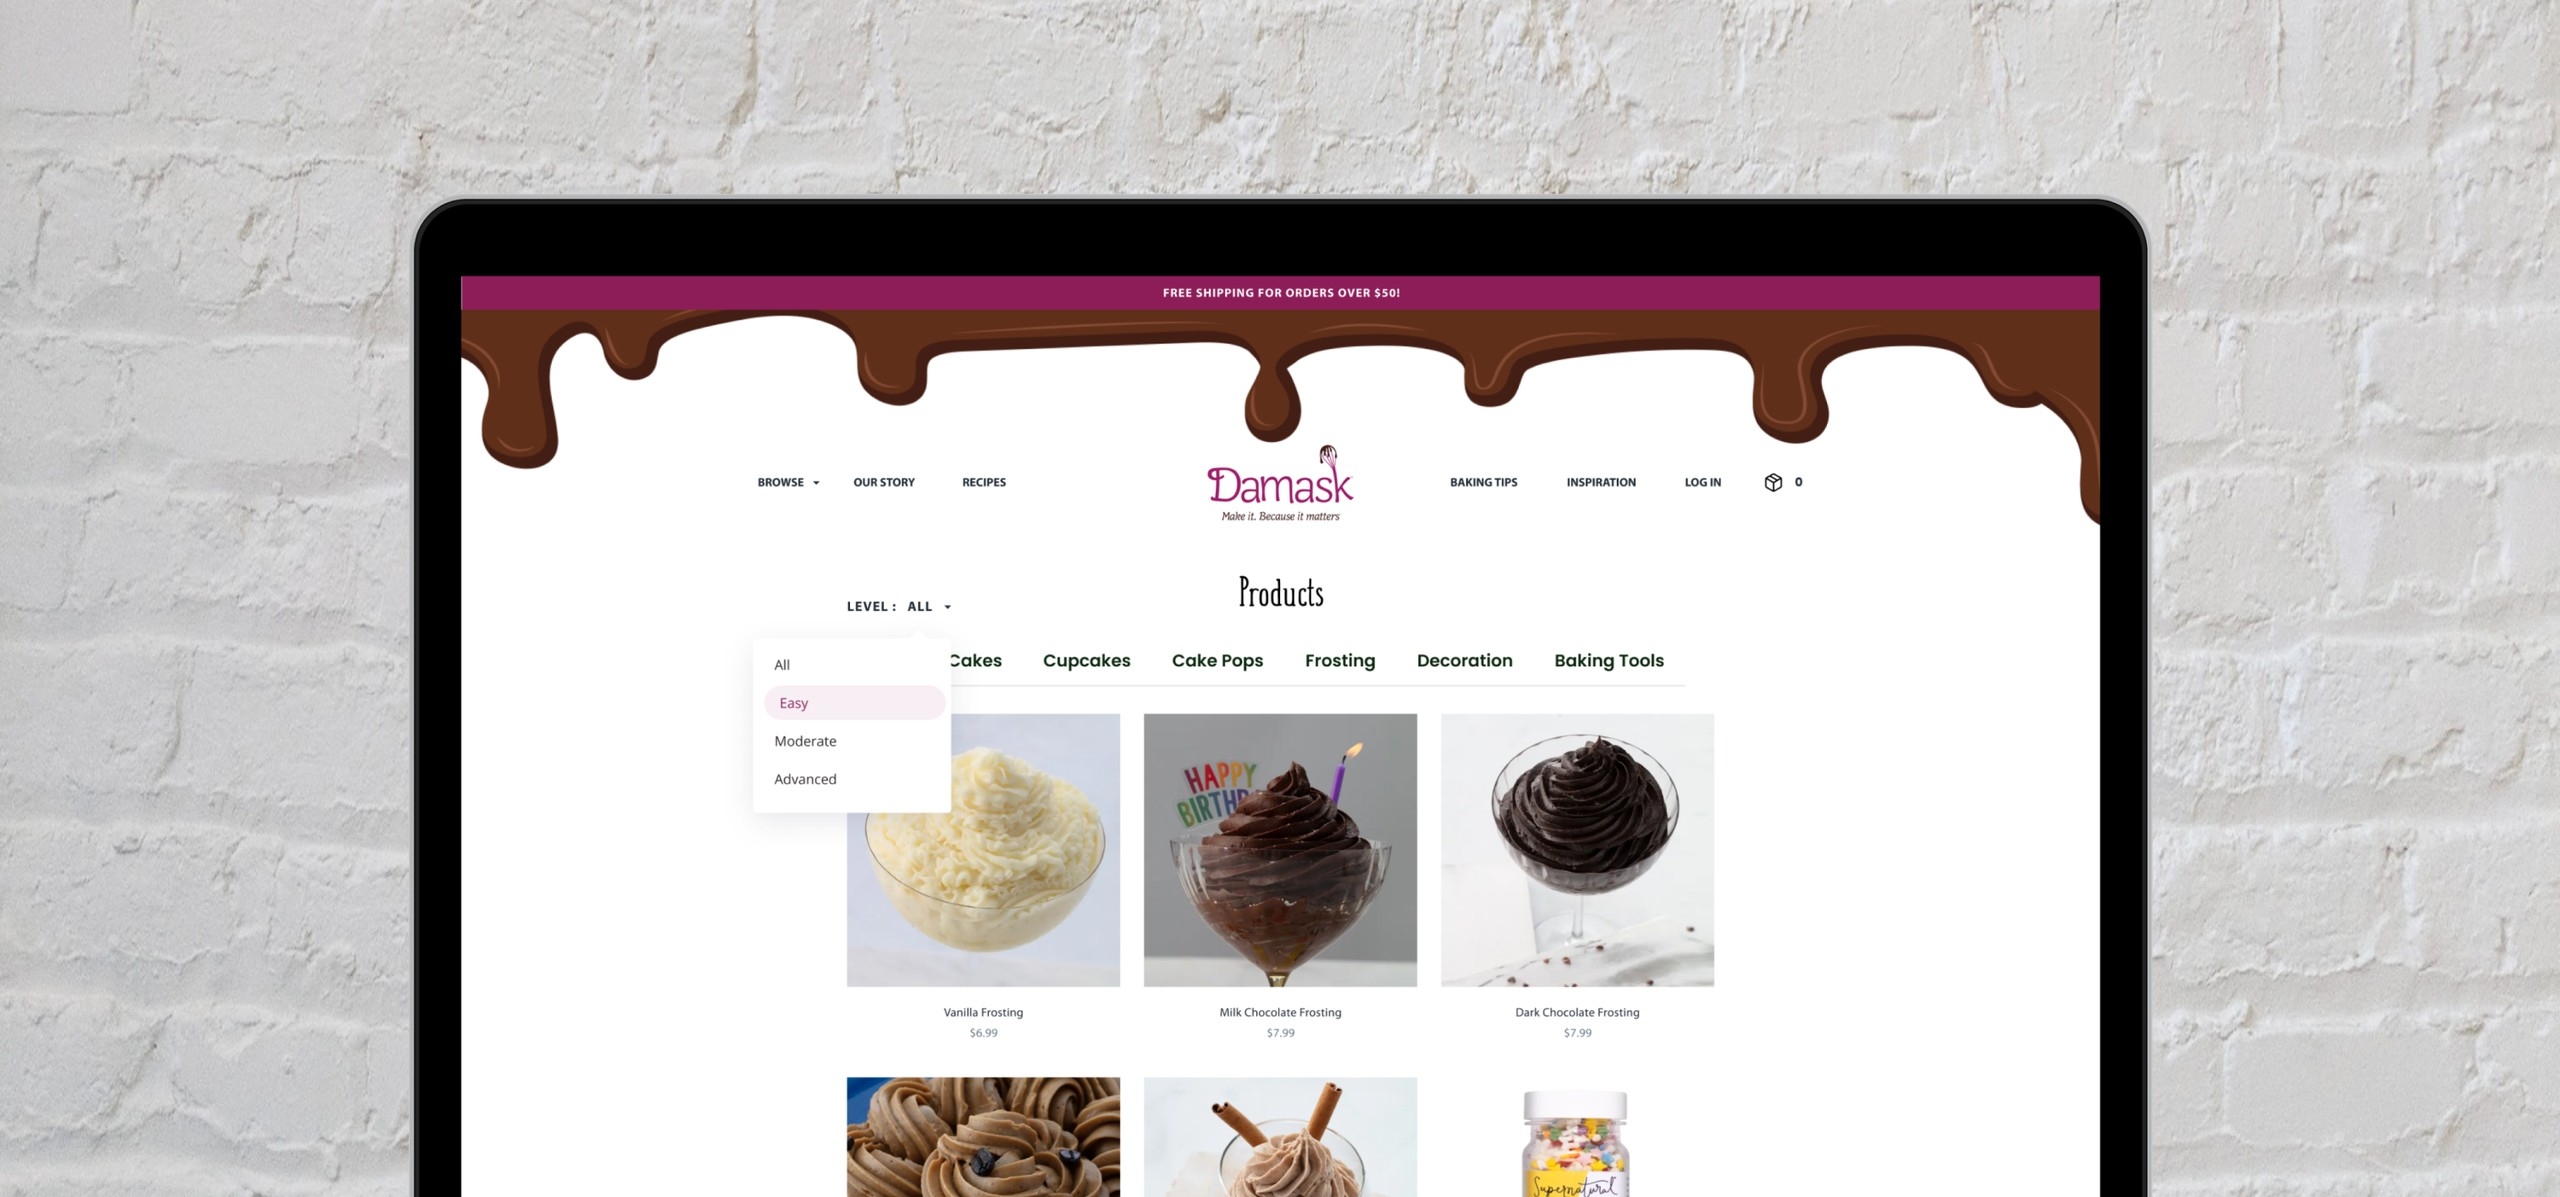 Damask Cakes Product Page Redesign